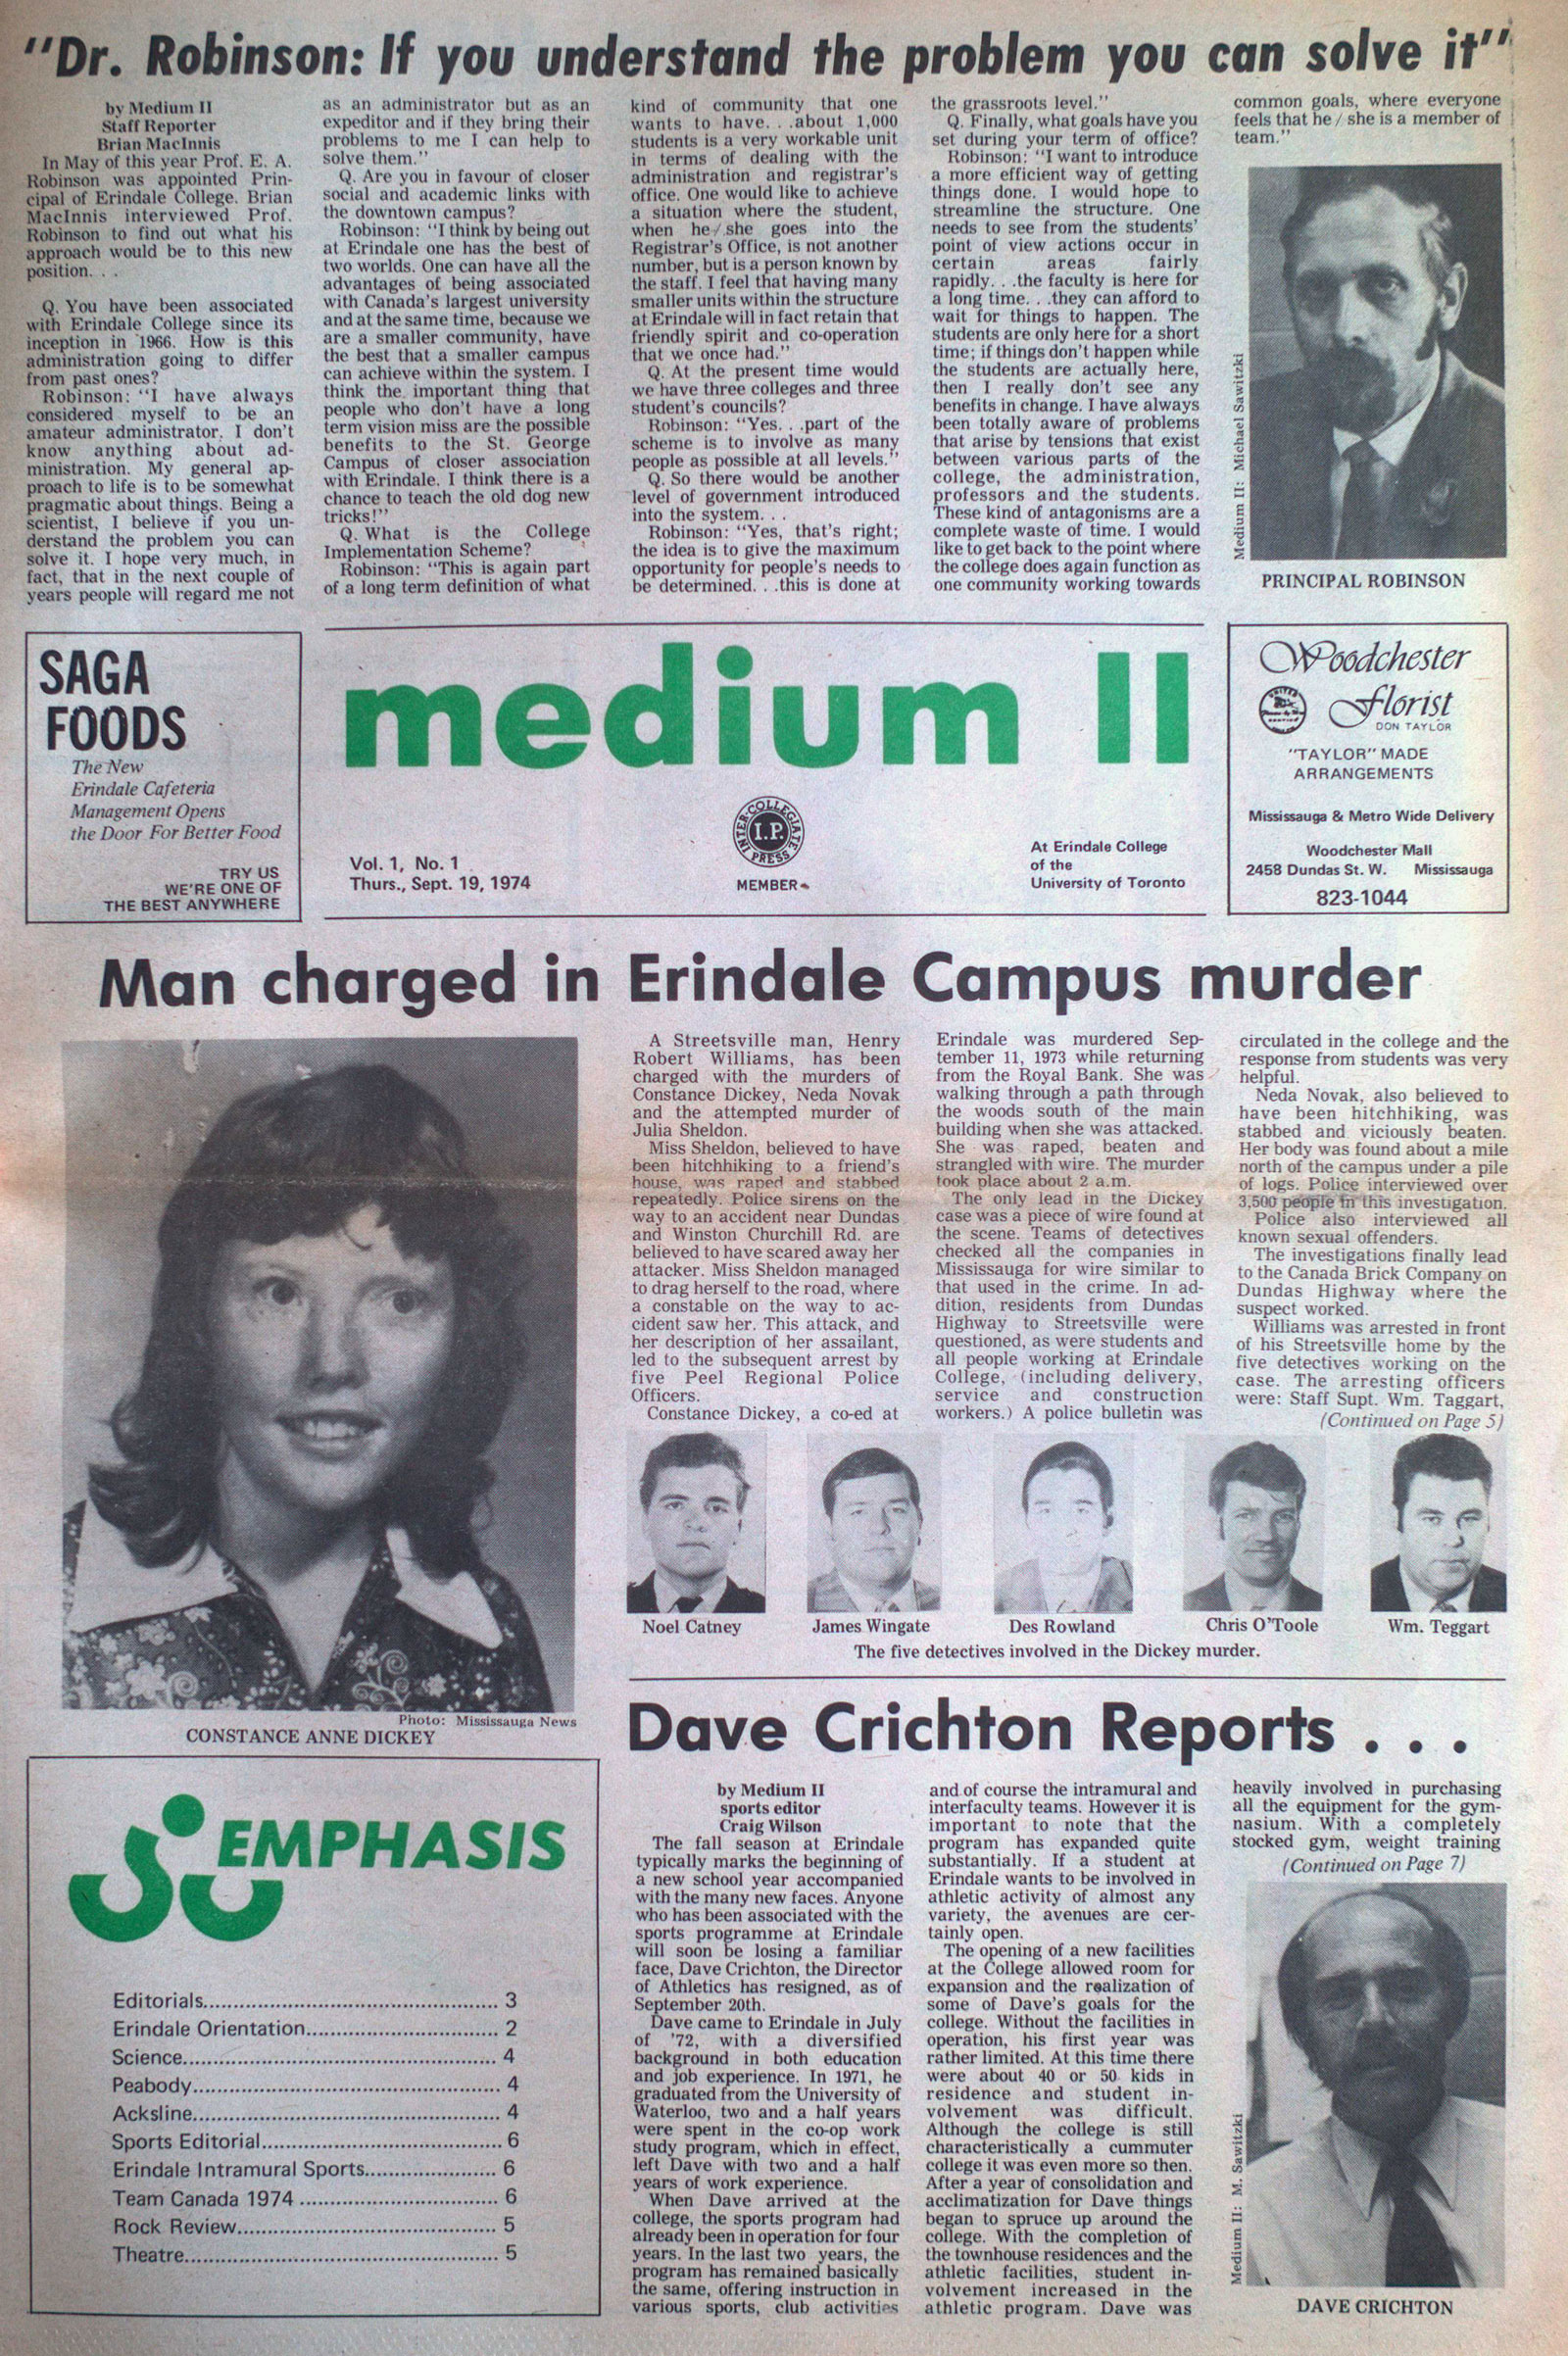 The Medium's first issue.